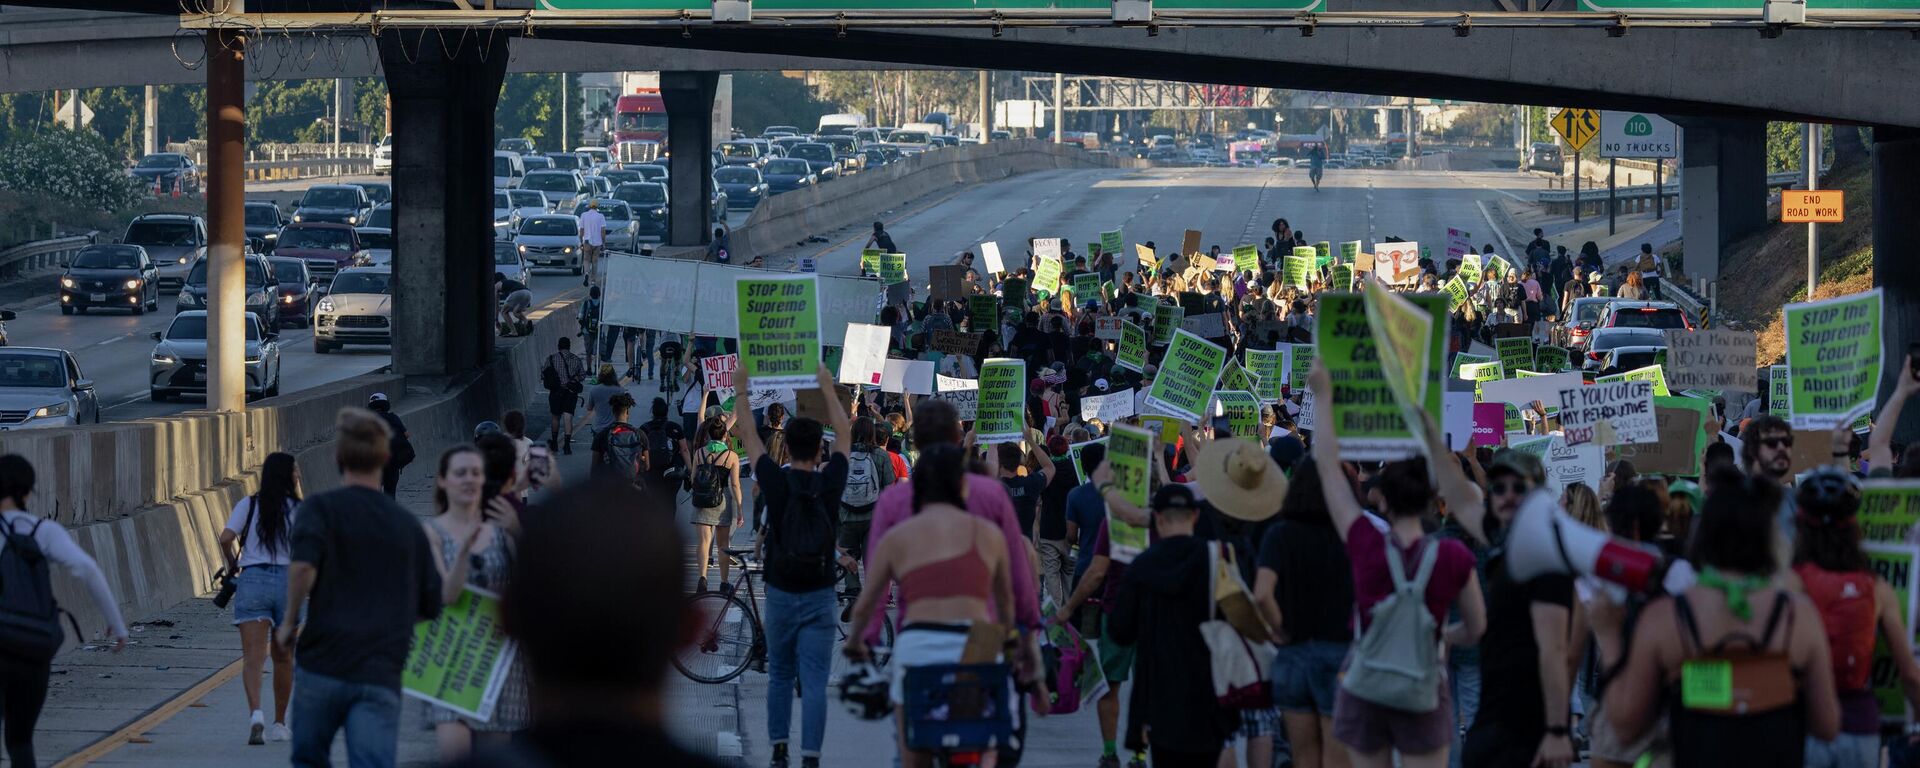 Protesters march northbound on the 110 Freeway to denounce the Supreme Court's decision in the Dobbs v Jackson Women's Health case on June 24, 2022 in Los Angeles, California.  - Sputnik International, 1920, 15.07.2022